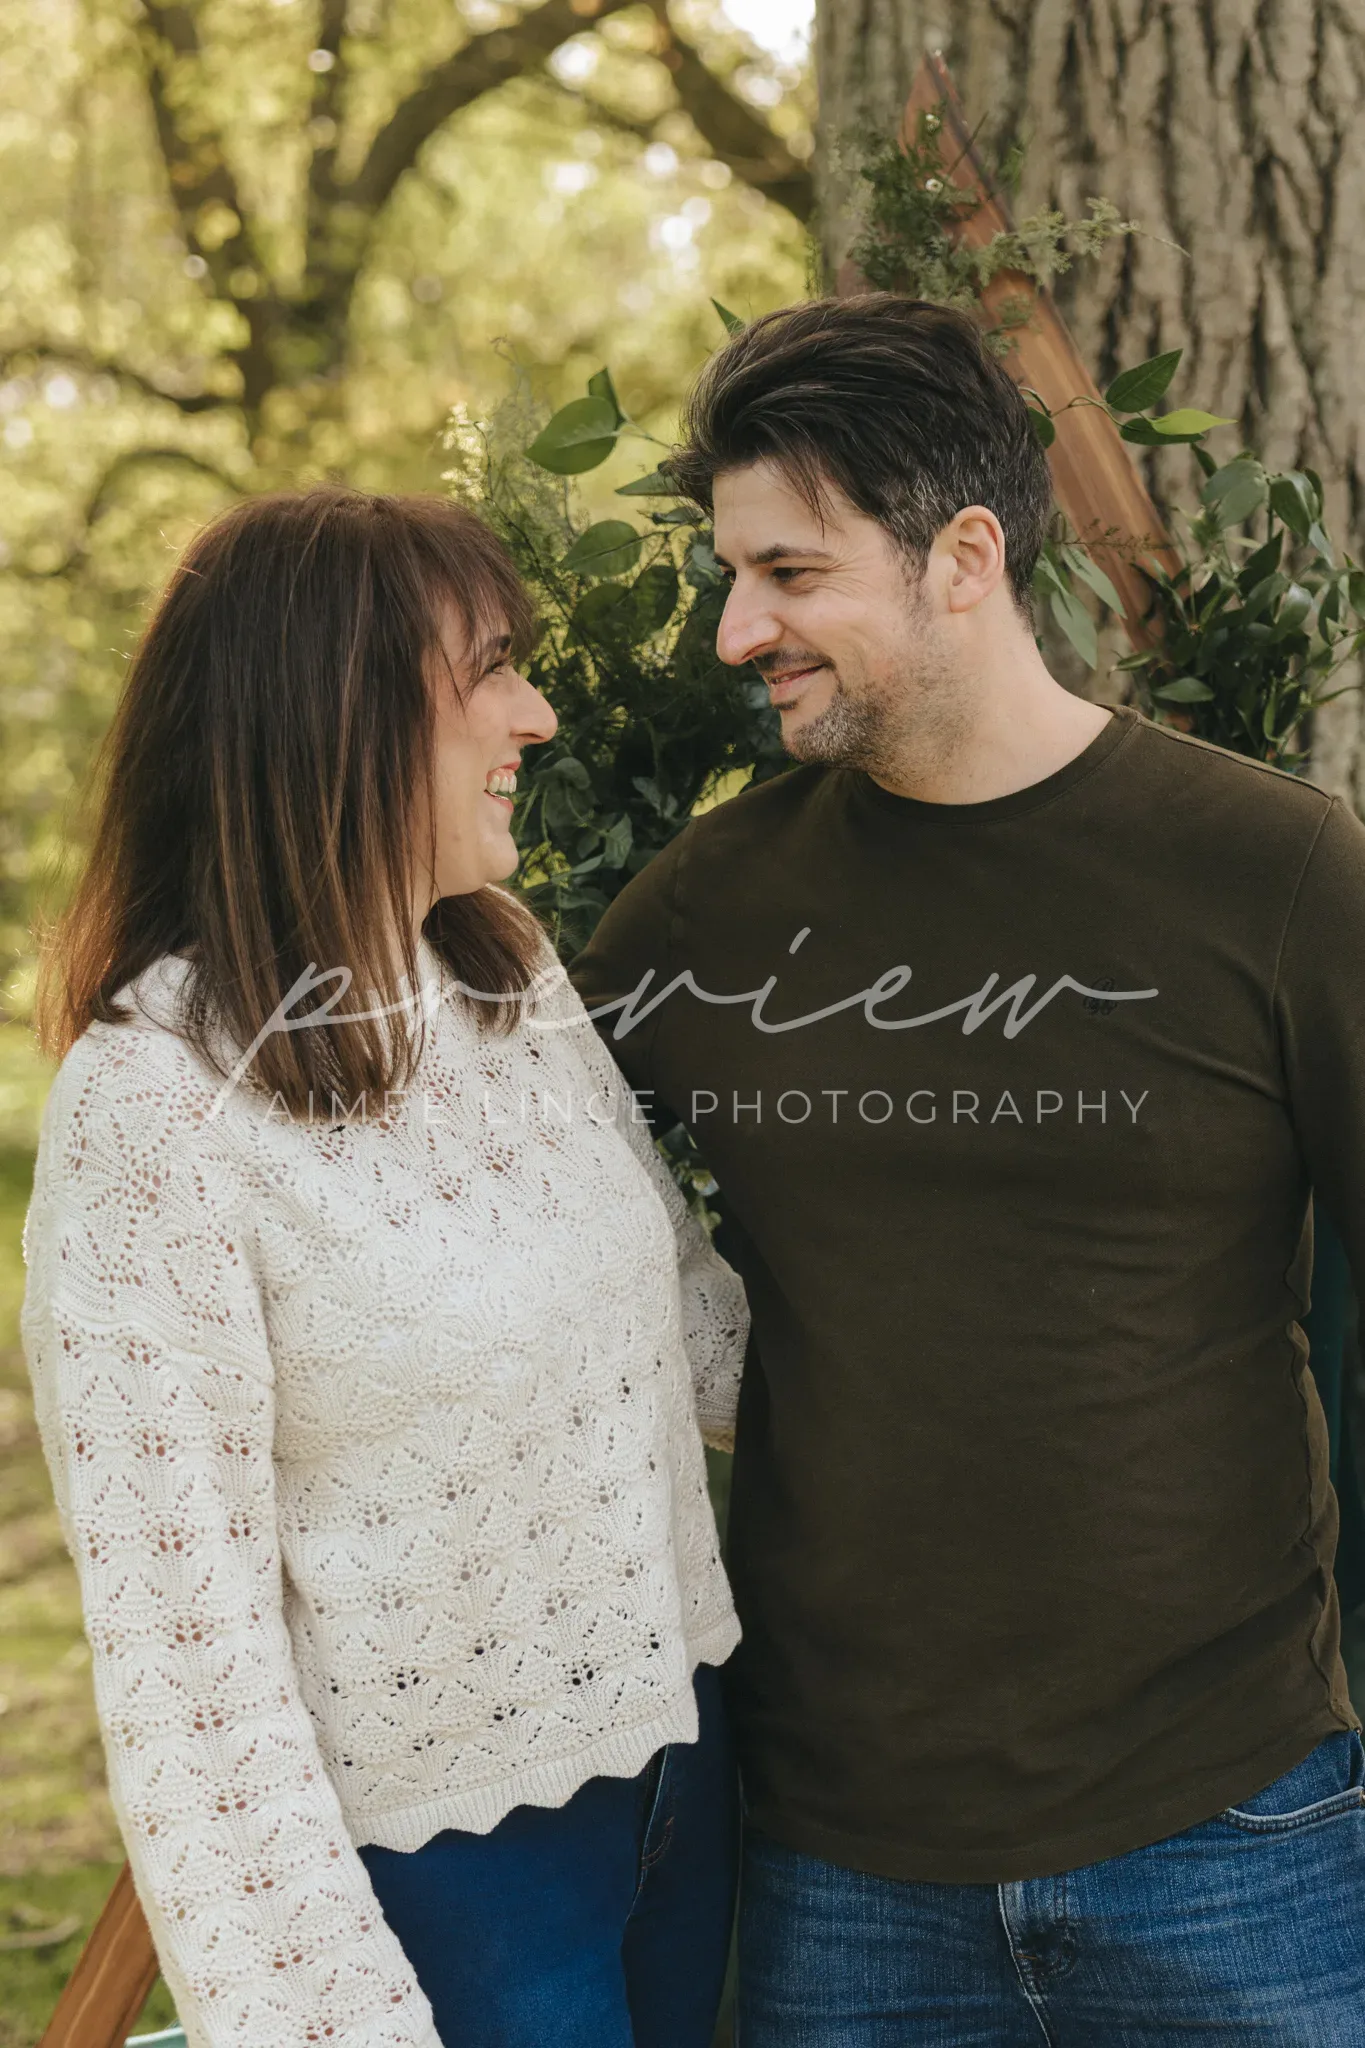 A man and a woman smile at each other, standing close under a tree. the woman wears a white knitted sweater and jeans, and the man wears a green shirt and jeans. the background is a lush park with soft sunlight filtering through the leaves.